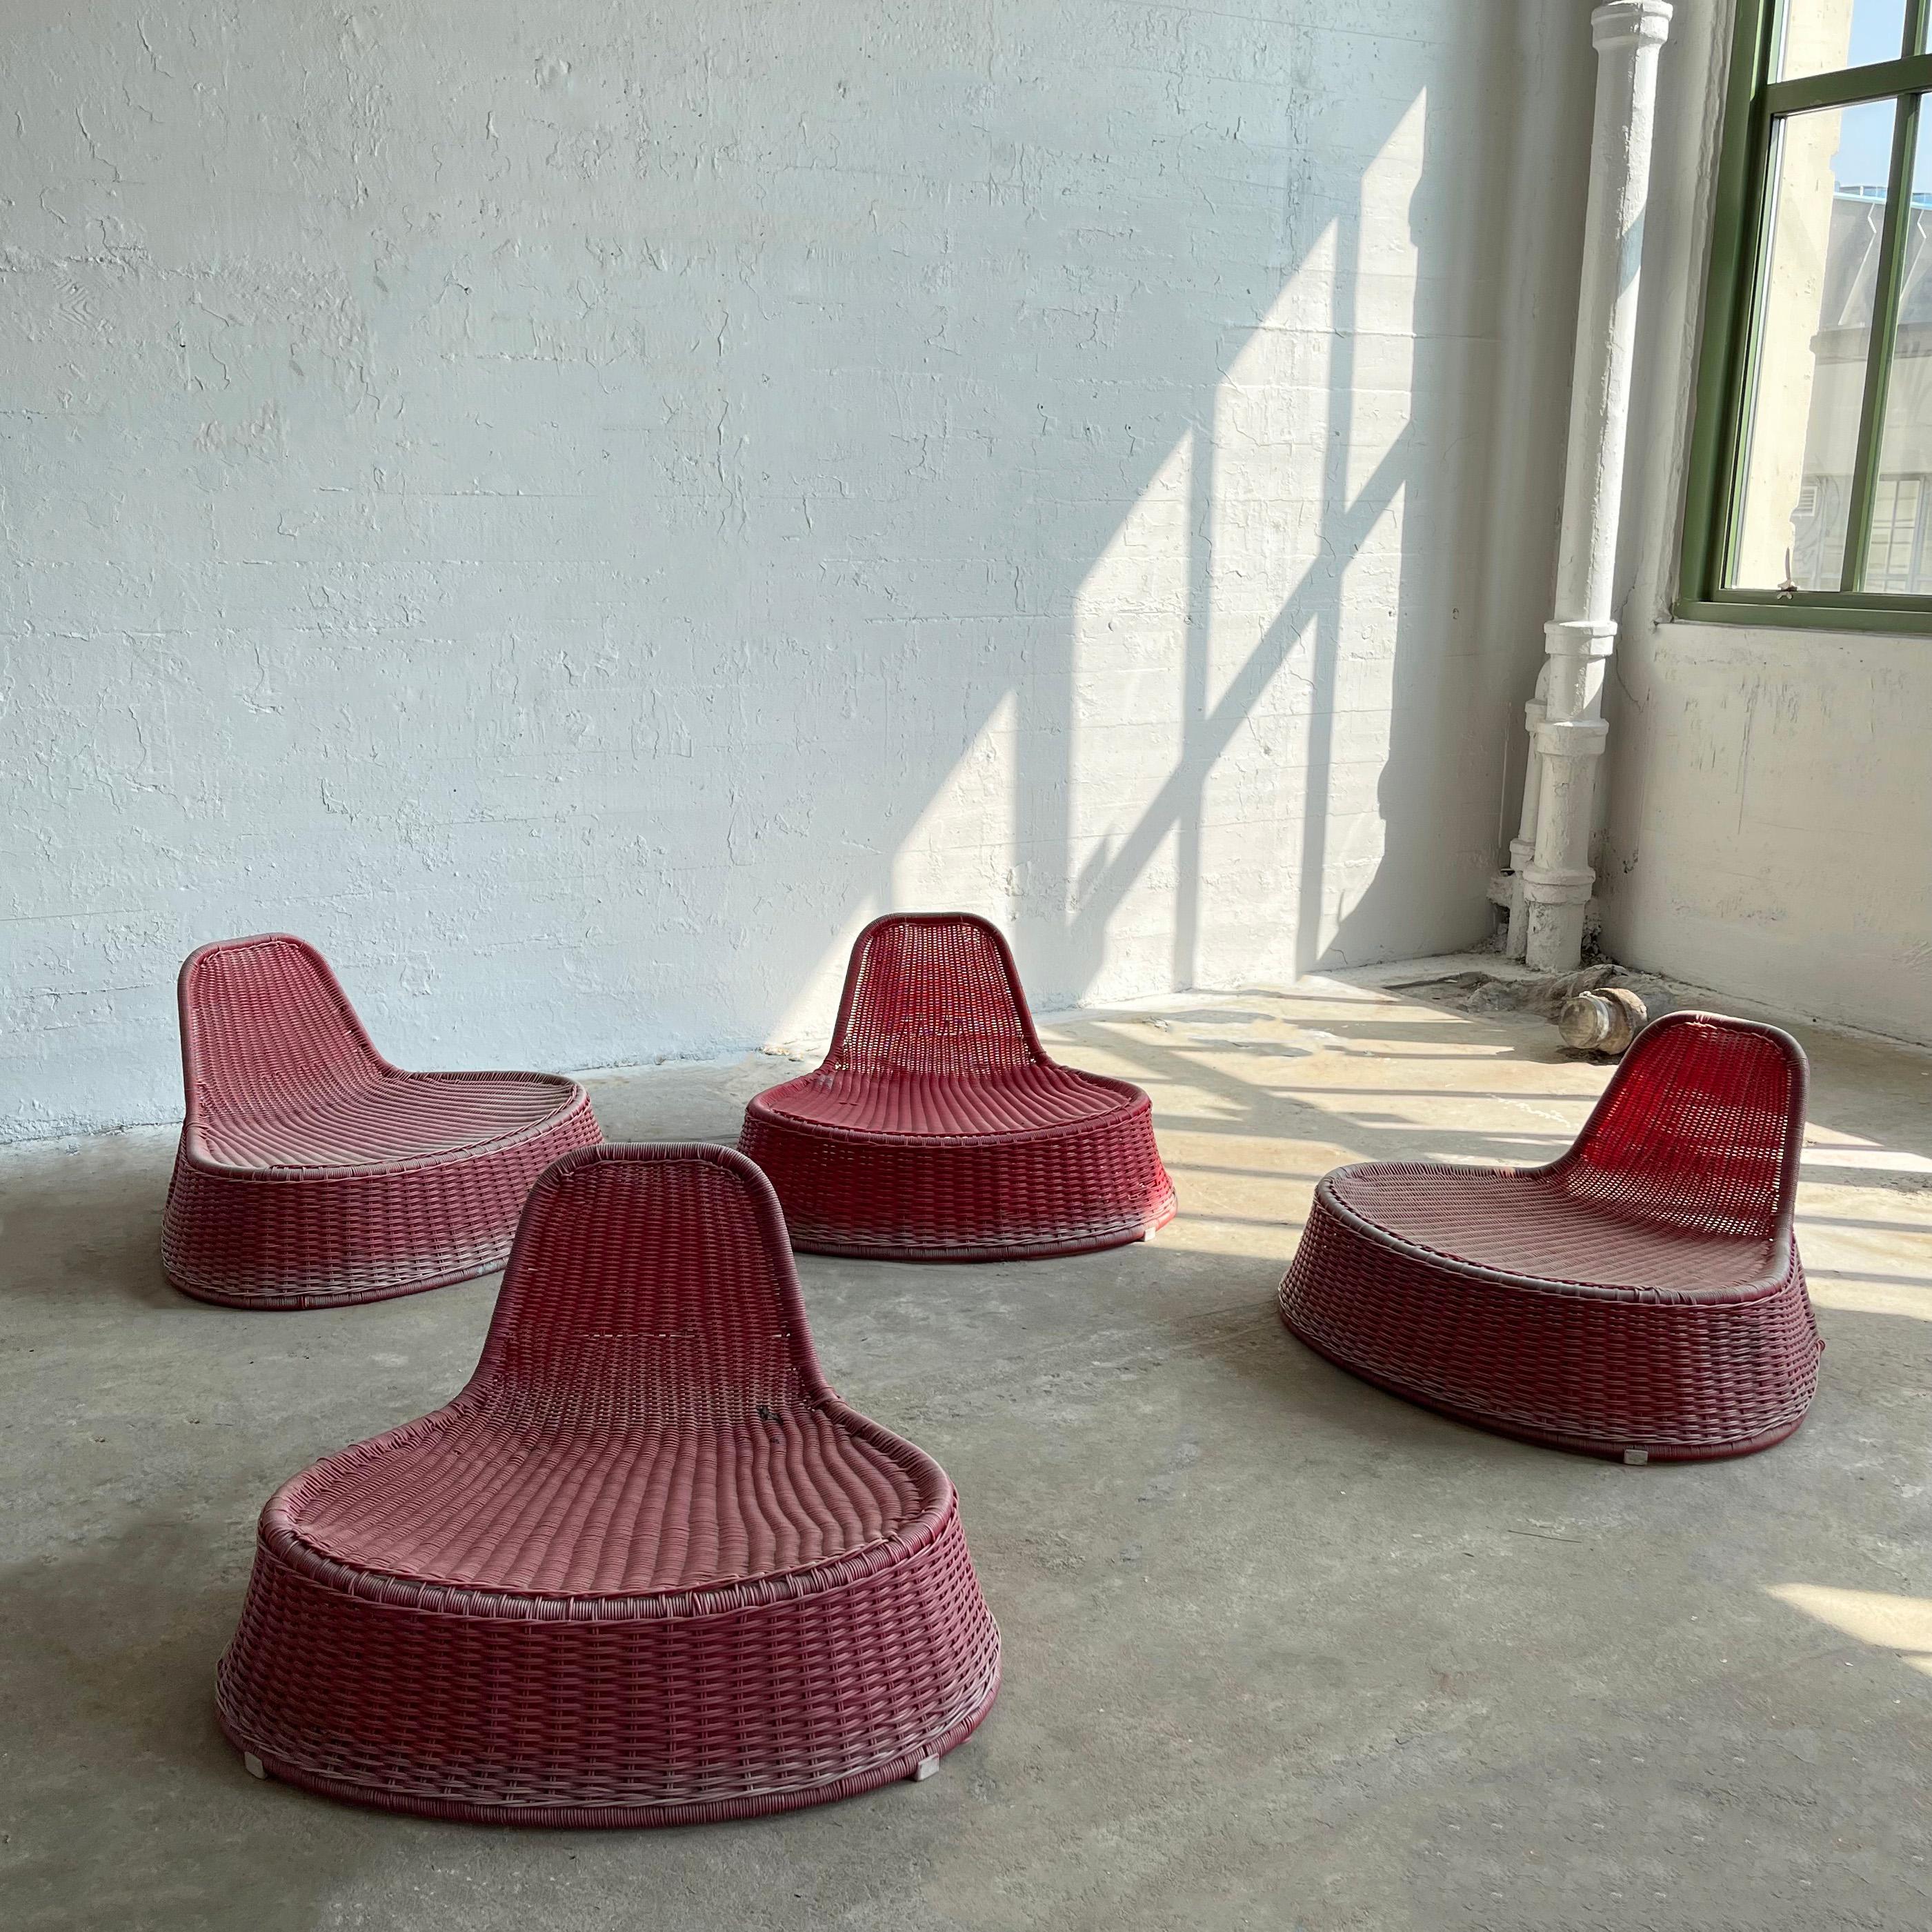 Organic Modern Pink Woven Outdoor Lounge Chairs By Monika Mulder For Ikea For Sale